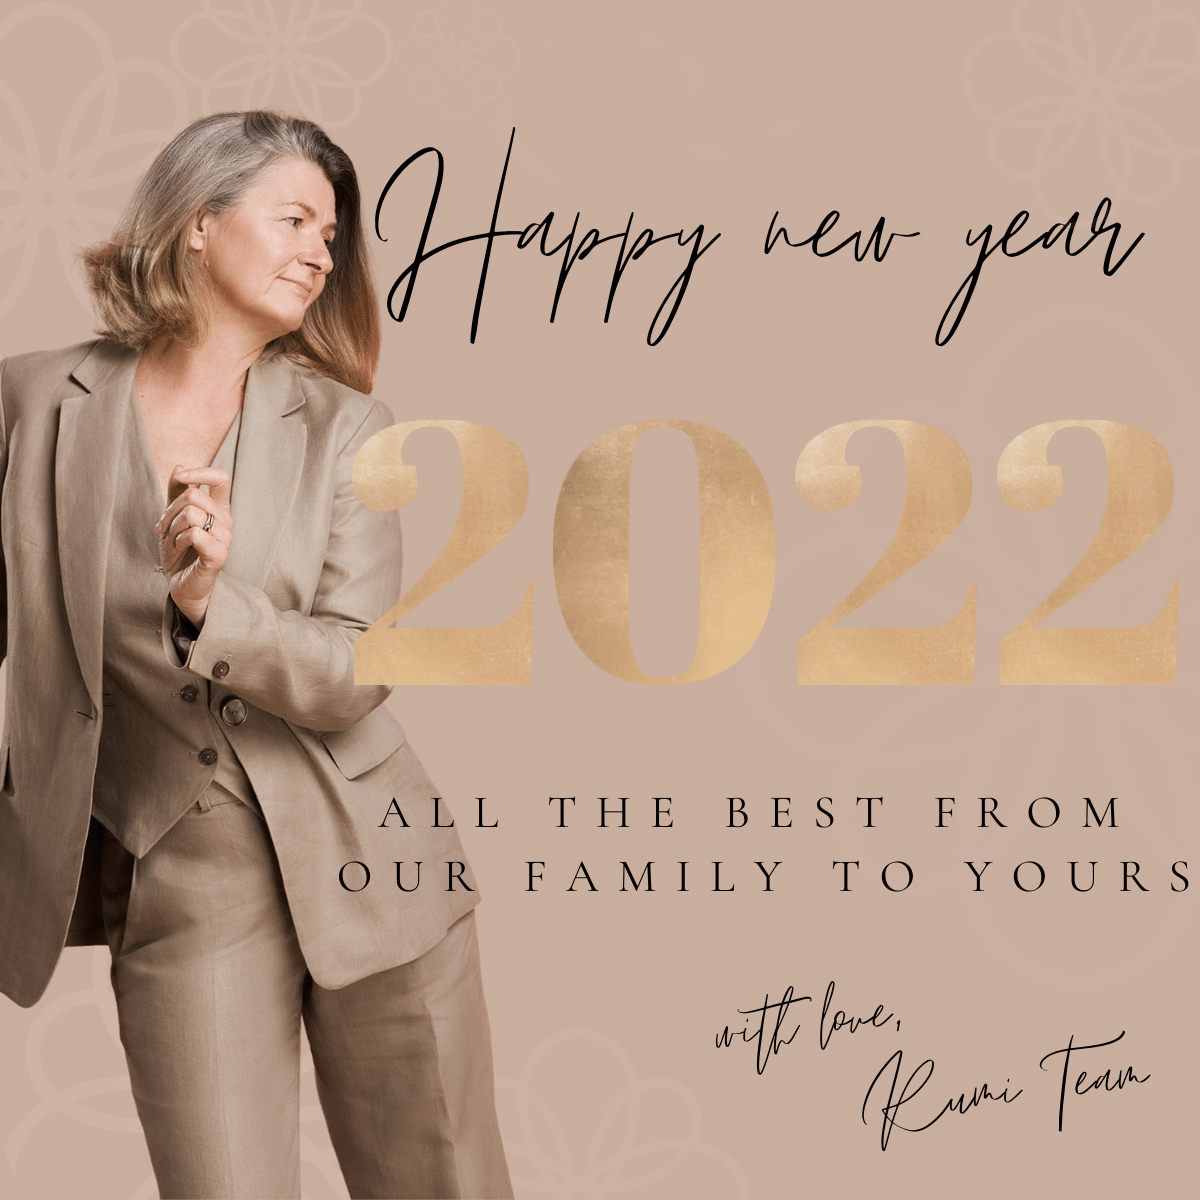 GET YOURSELF NEW YEAR READY!